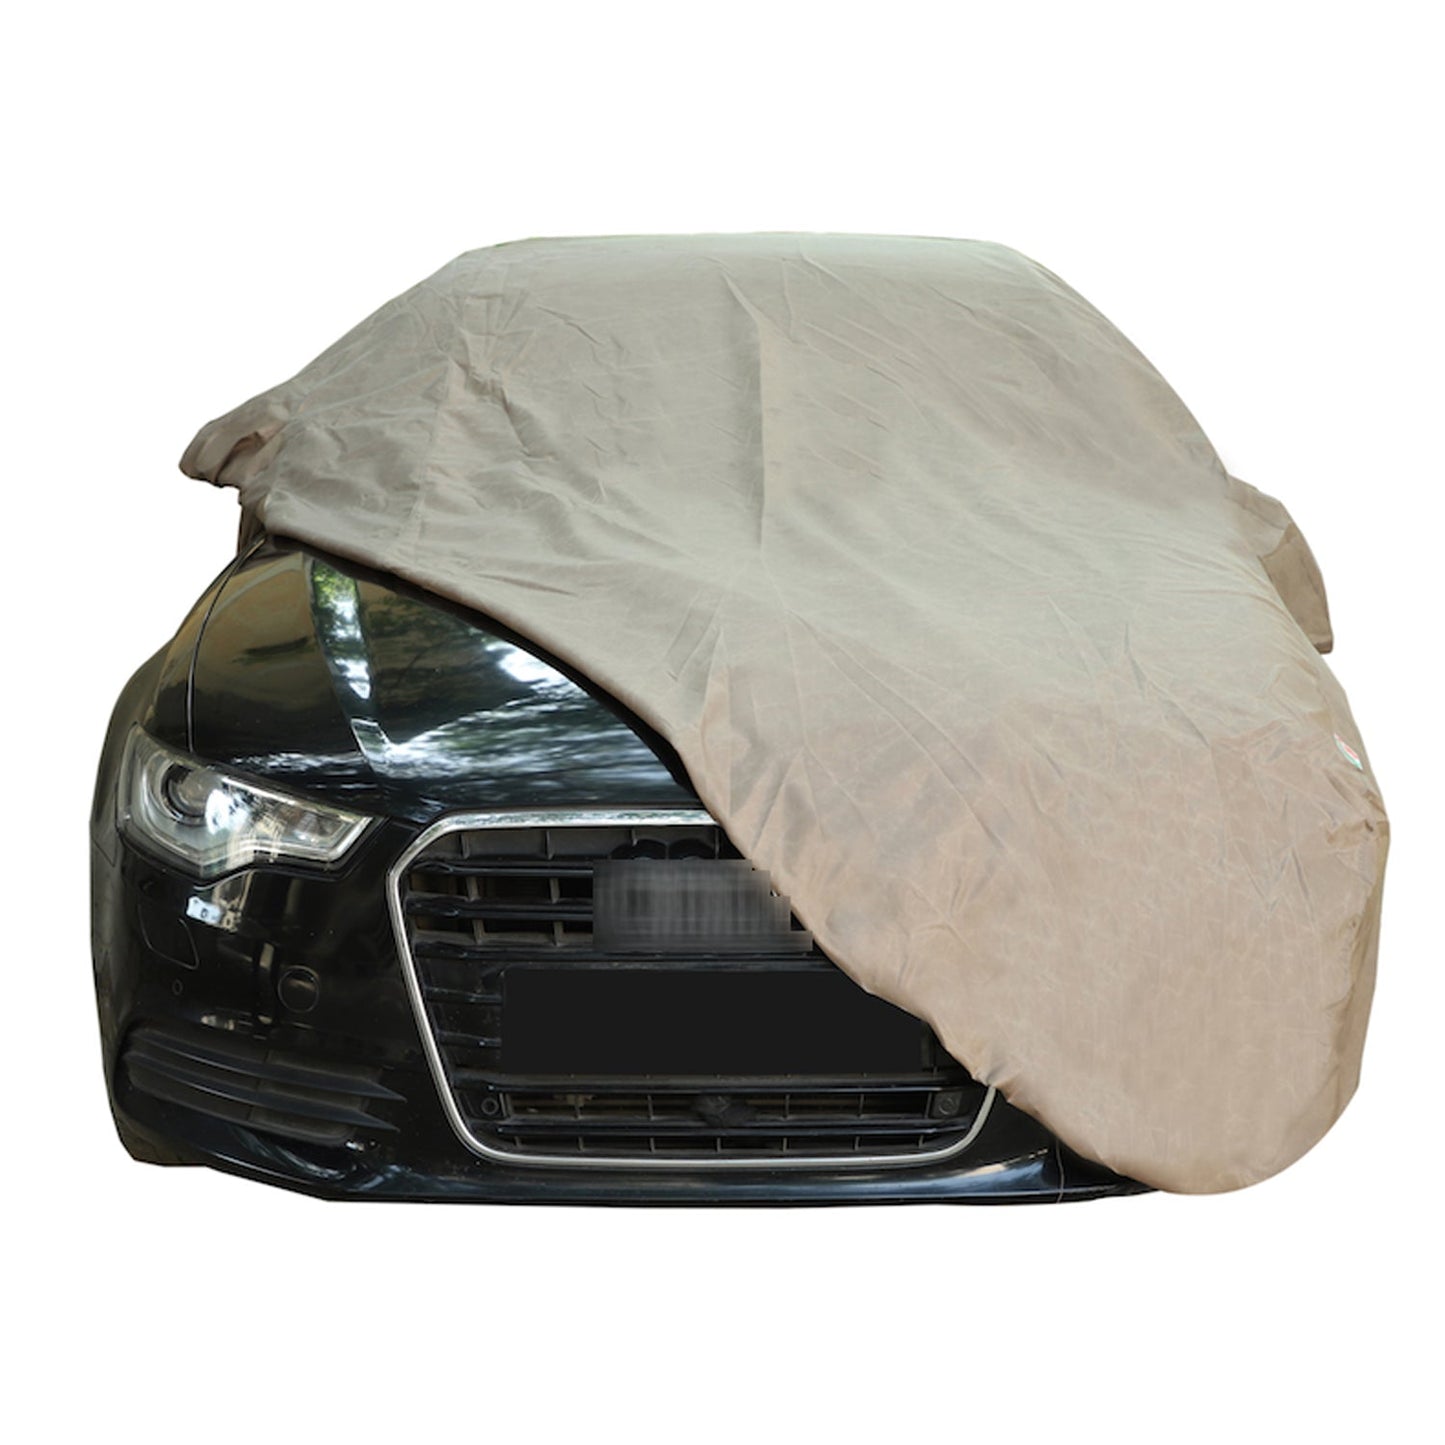 Oshotto Brown 100% Waterproof Car Body Cover with Mirror Pockets For Maruti Suzuki Swift Old